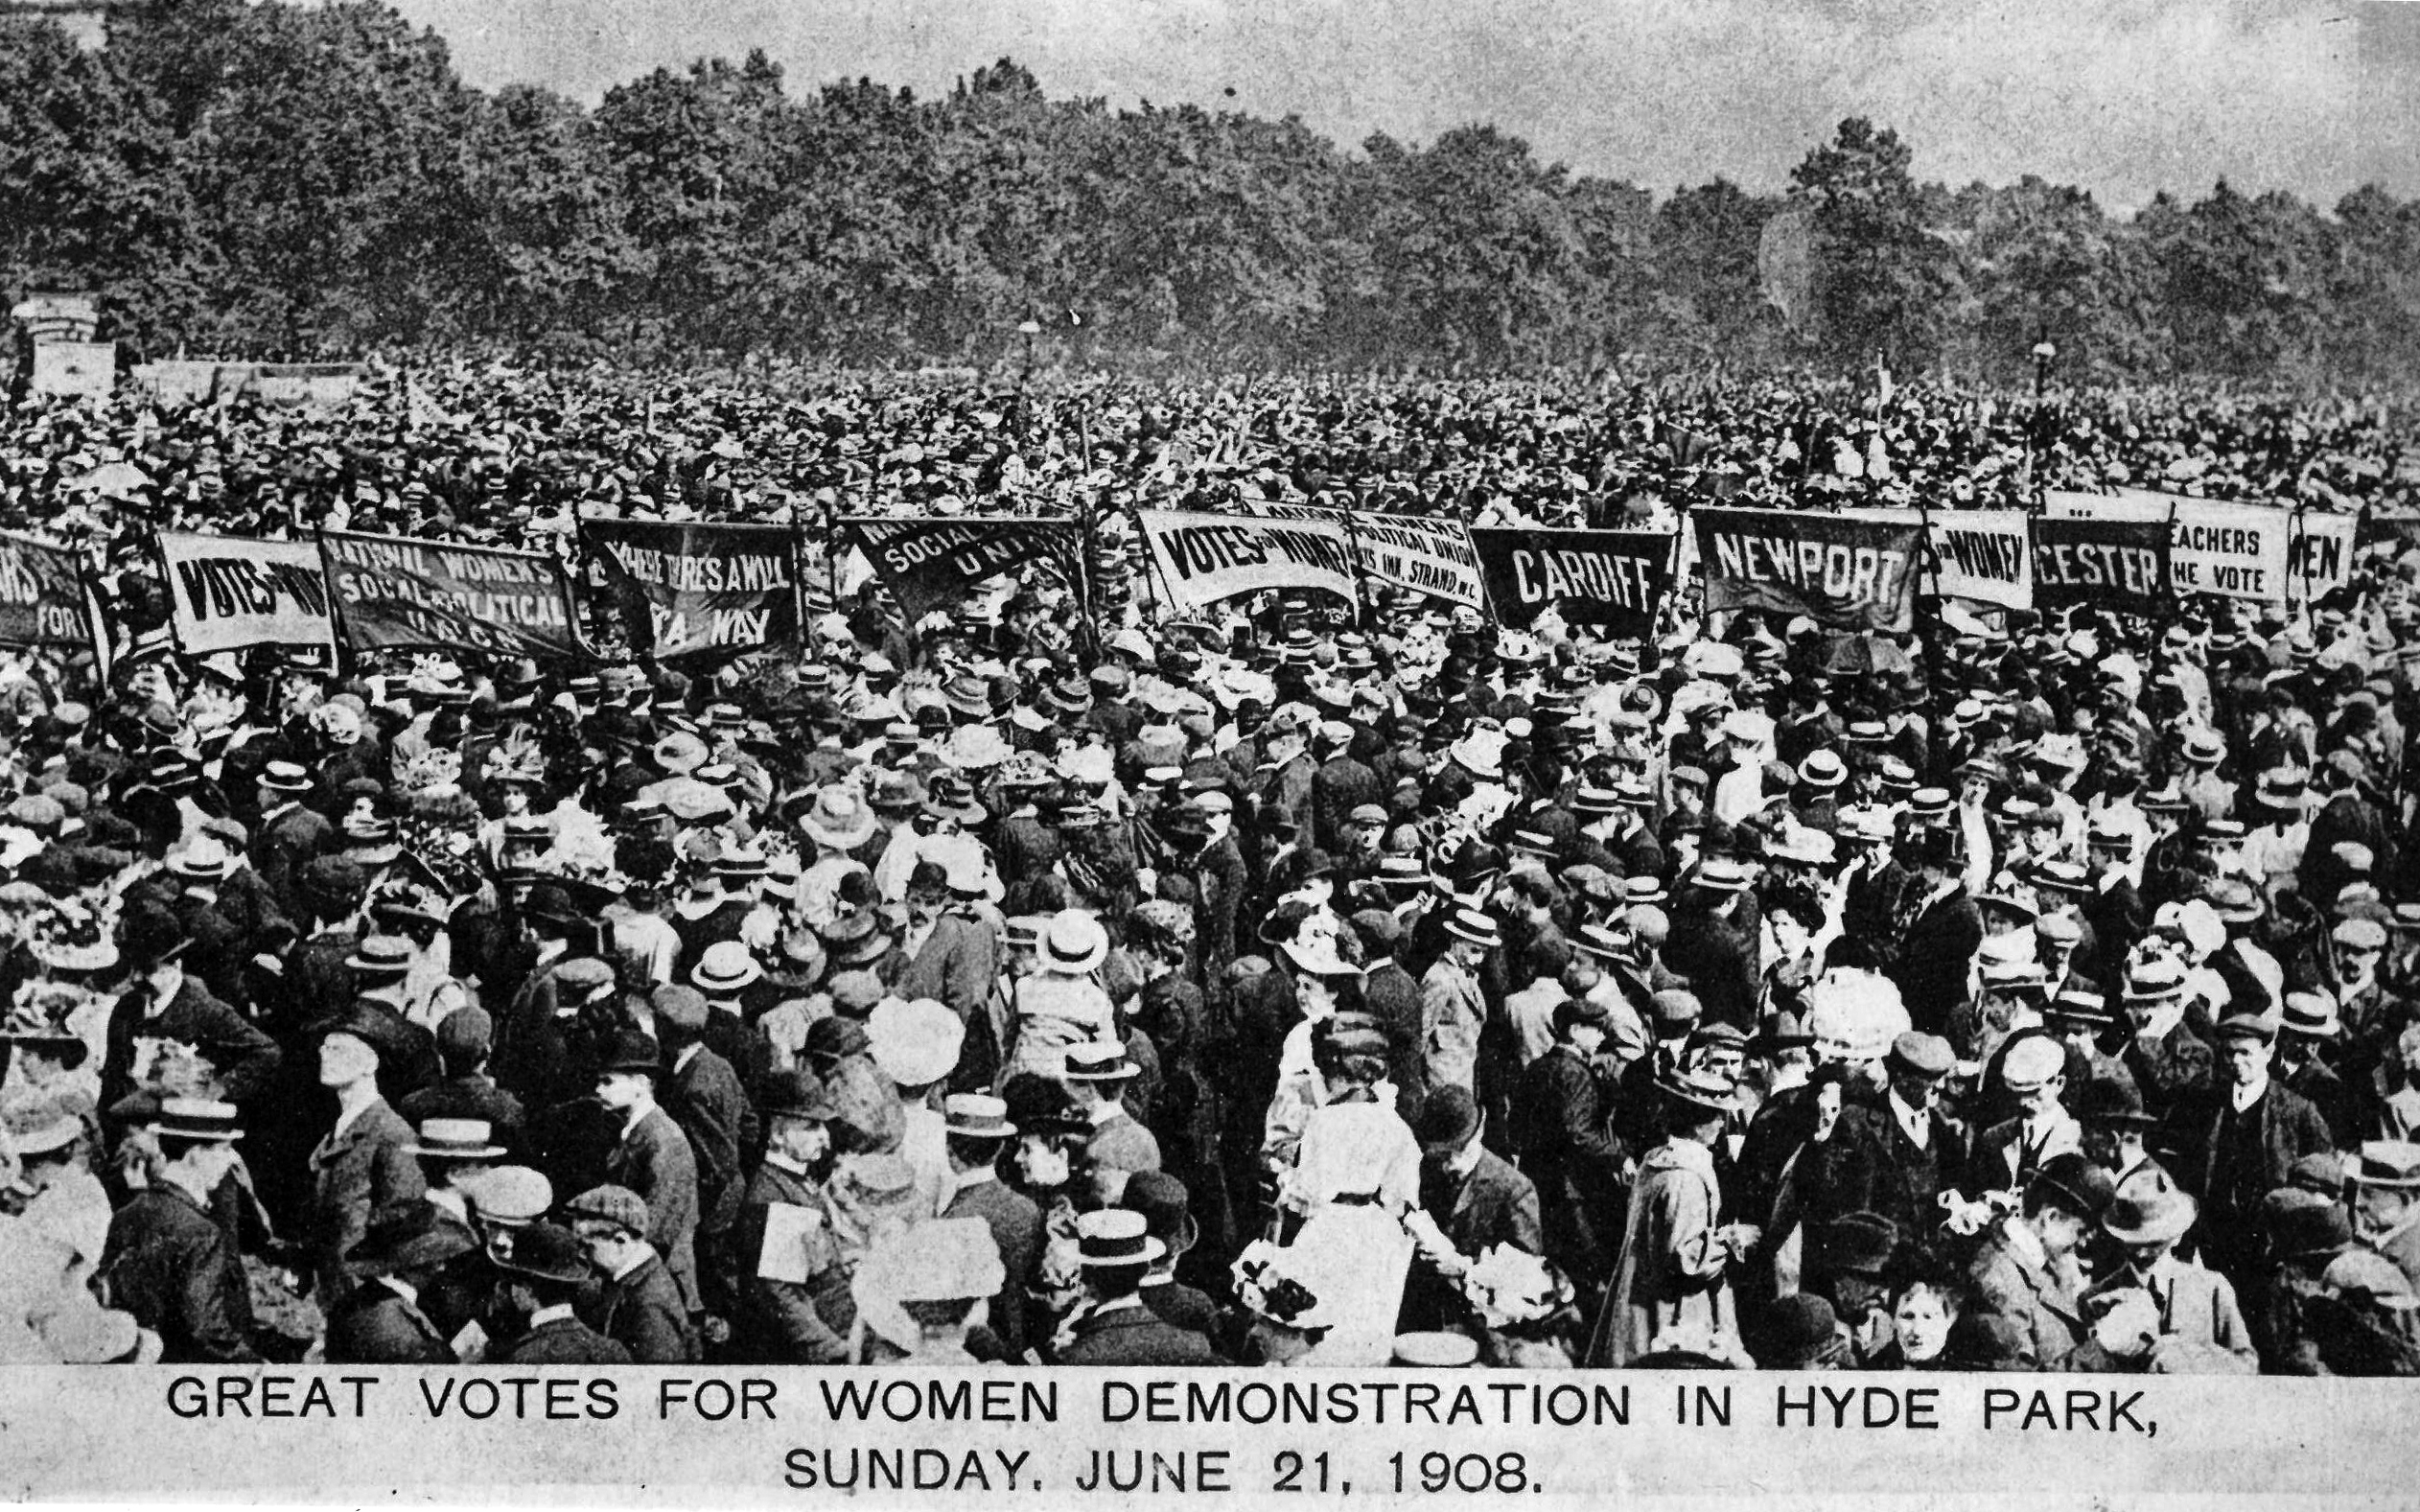 Crowds gather for 'Women's Sunday', 21 June 1908